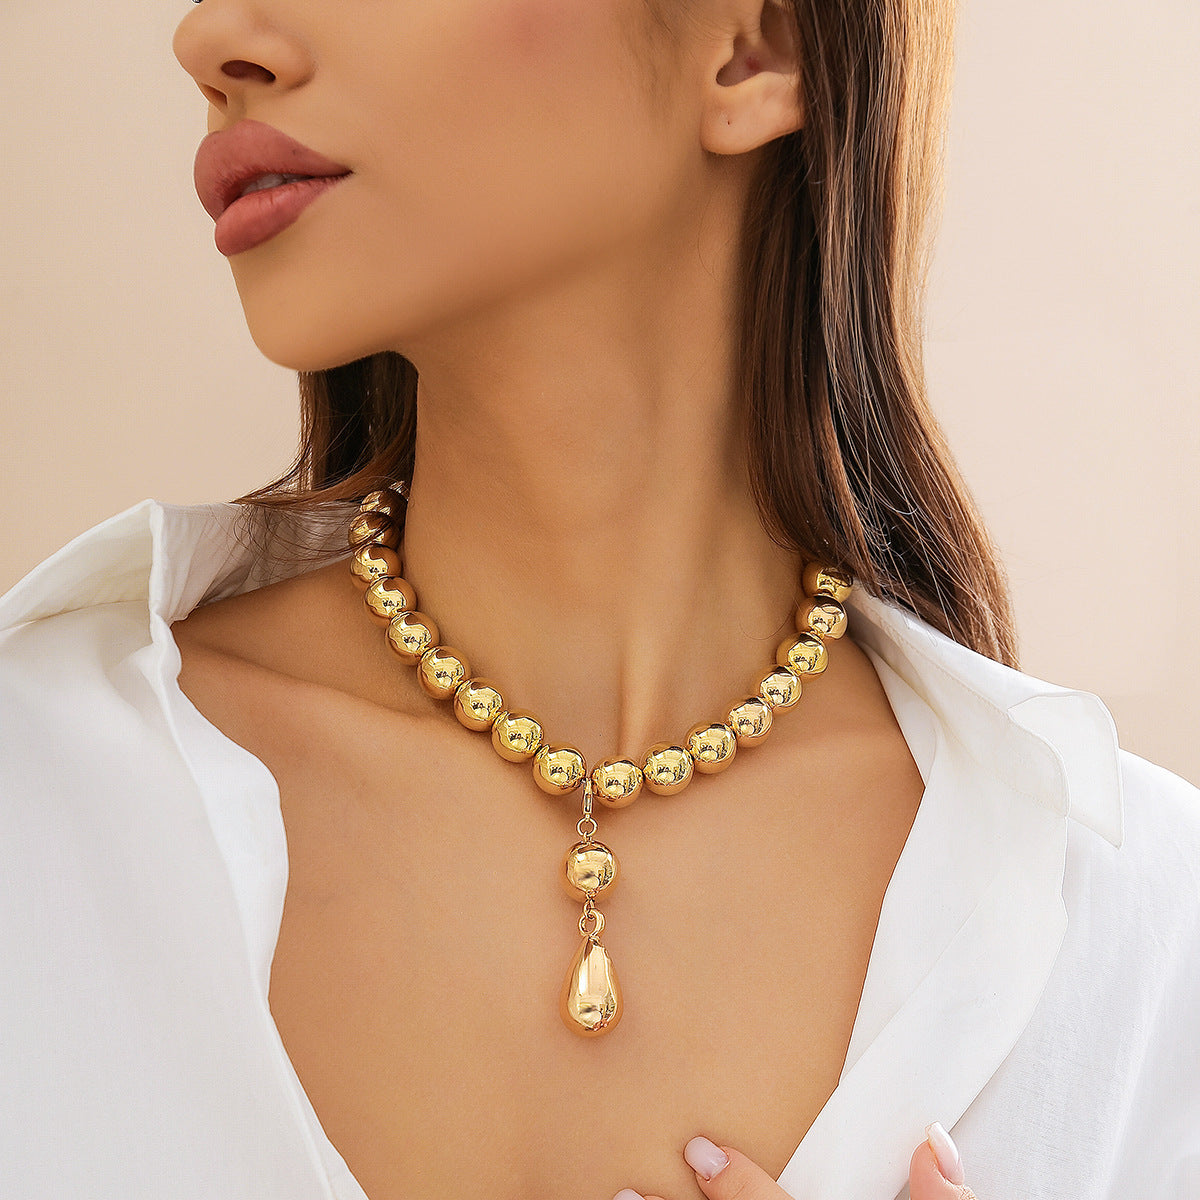 Extravagant Pearl Necklace with Metal Drop Pendant